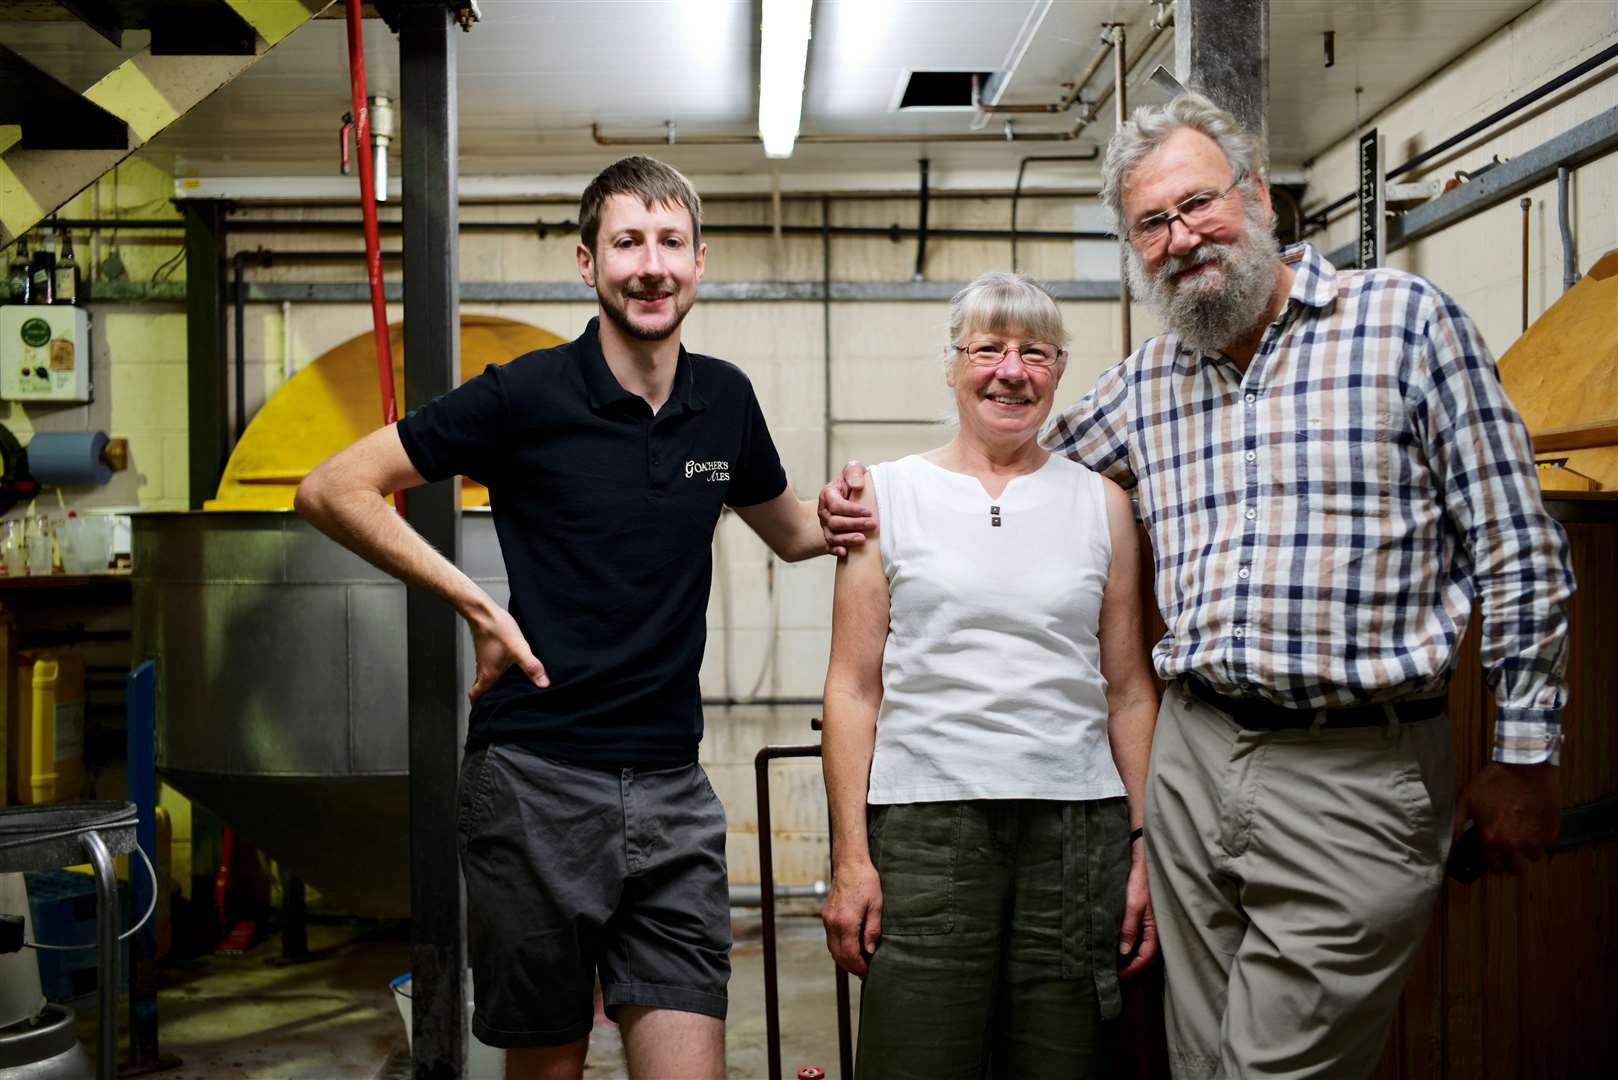 Howard Goacher (left) is now central to operations at Goacher's Ales, the brewery founded by his parents Phil and Debbie